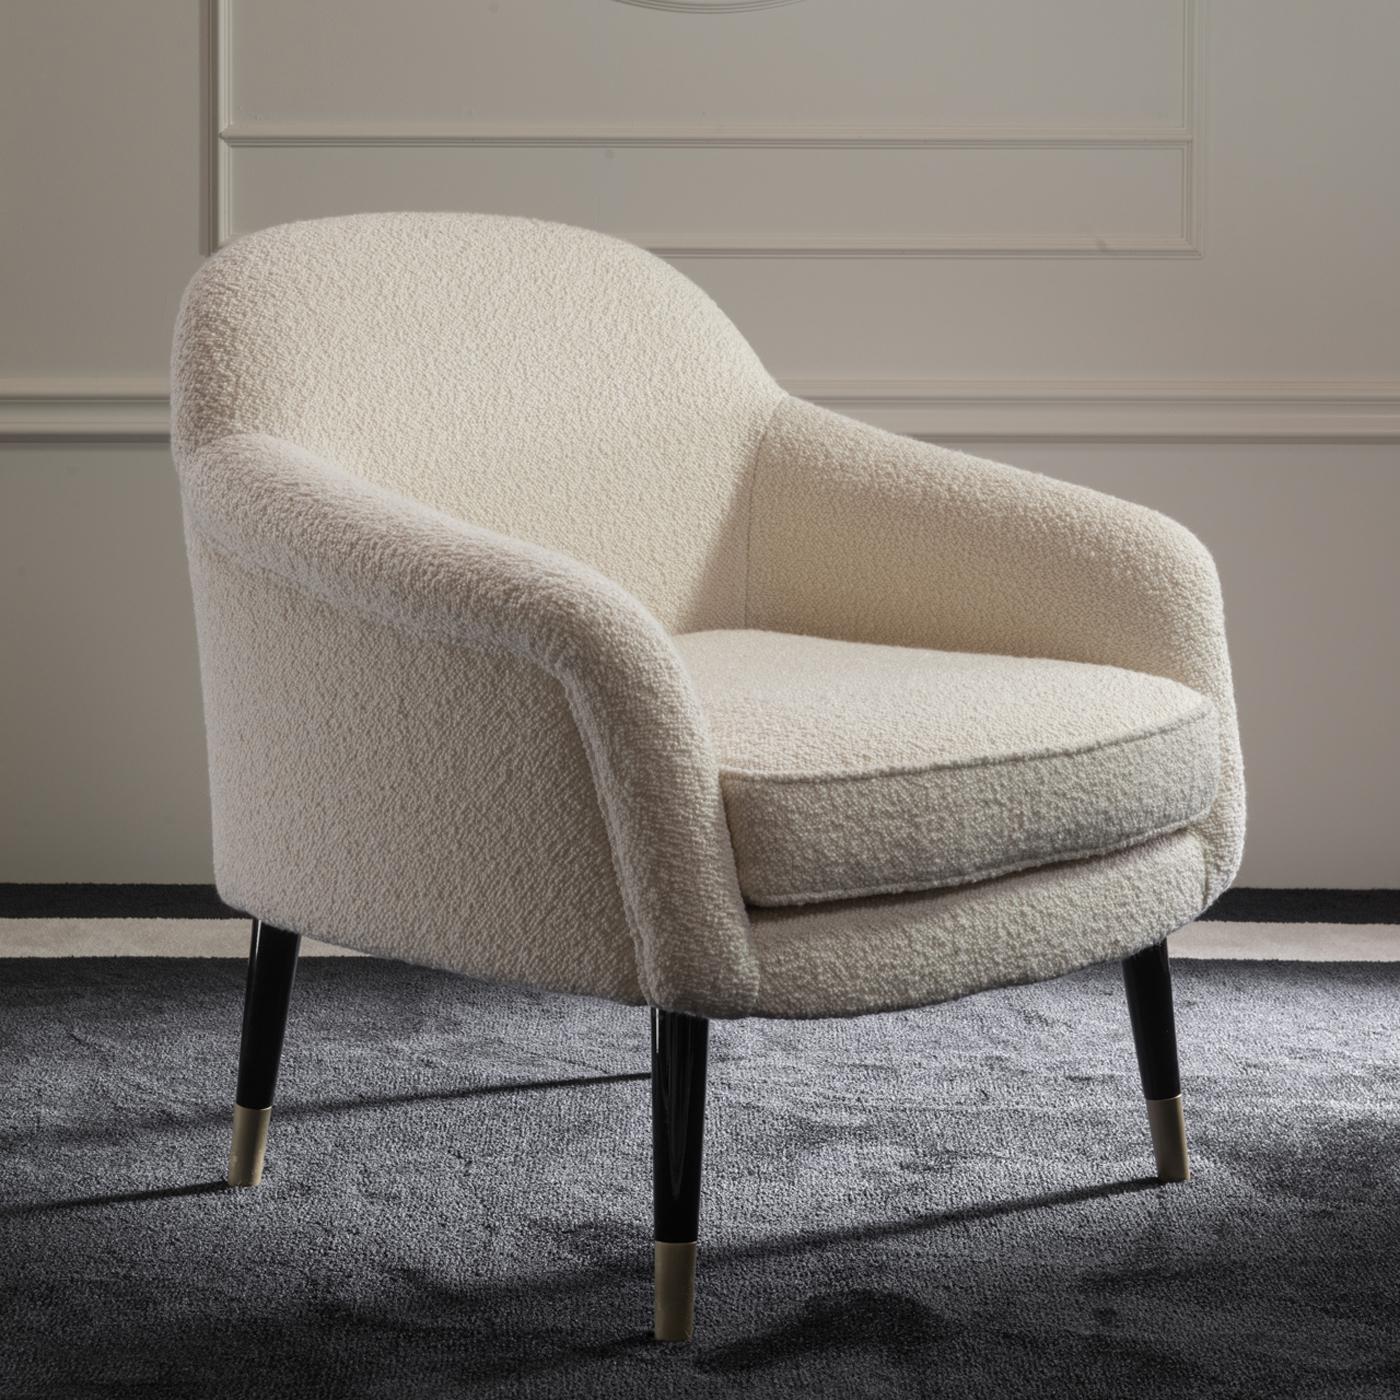 Part of the Bernadette collection, this elegant armchair is marked by simple, sinuous lines and elegant allure. The rounded back and enveloping armrests reinterpret the Classic bergere silhouette with a modern twist, with the velvety ivory